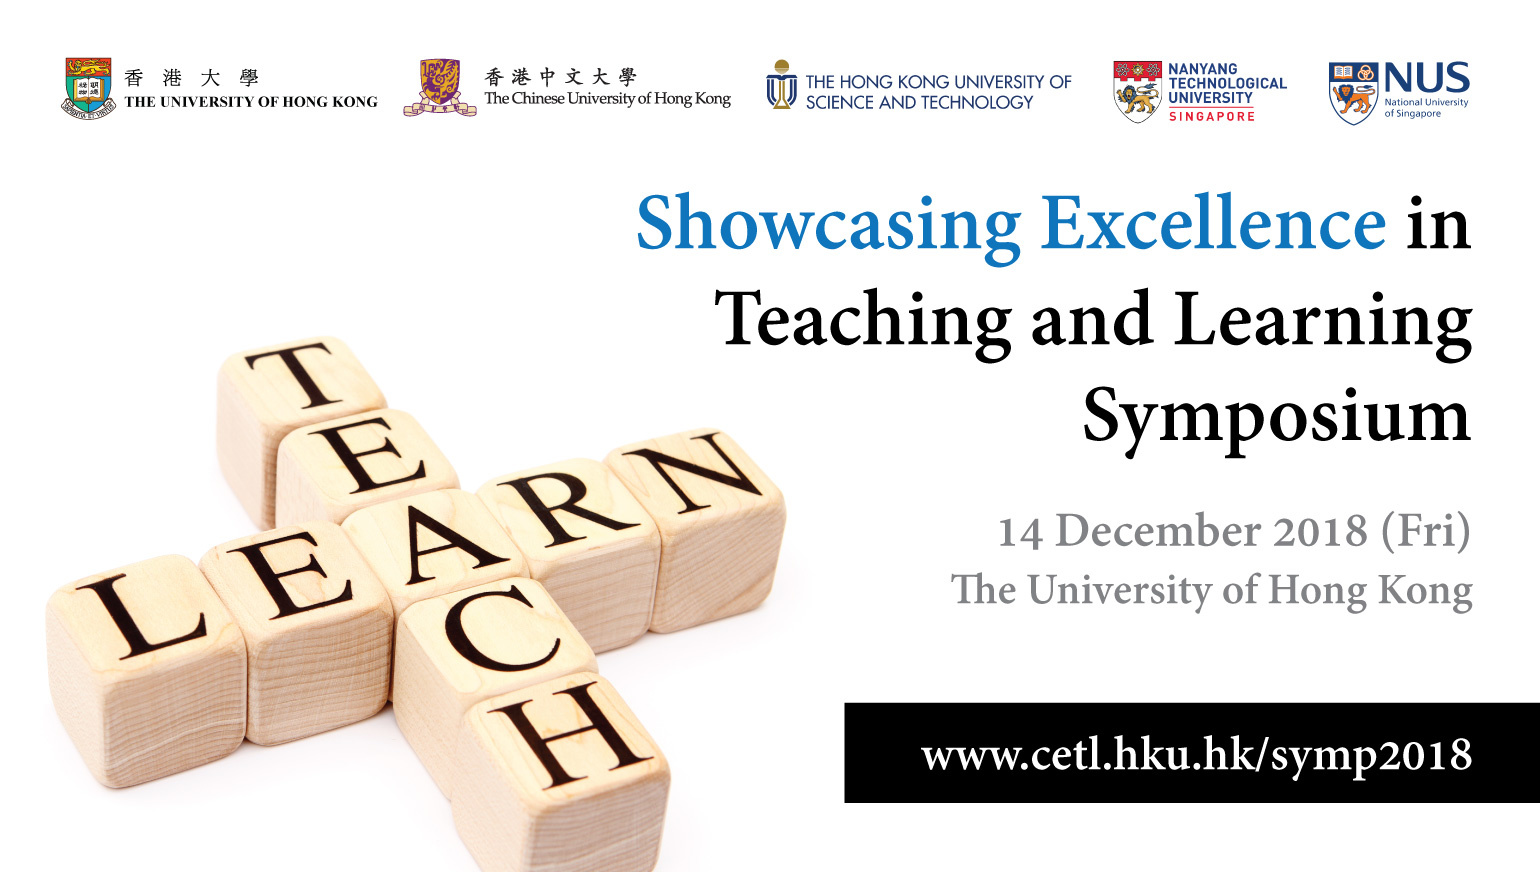 Showcasing Excellence in Teaching and Learning Symposium